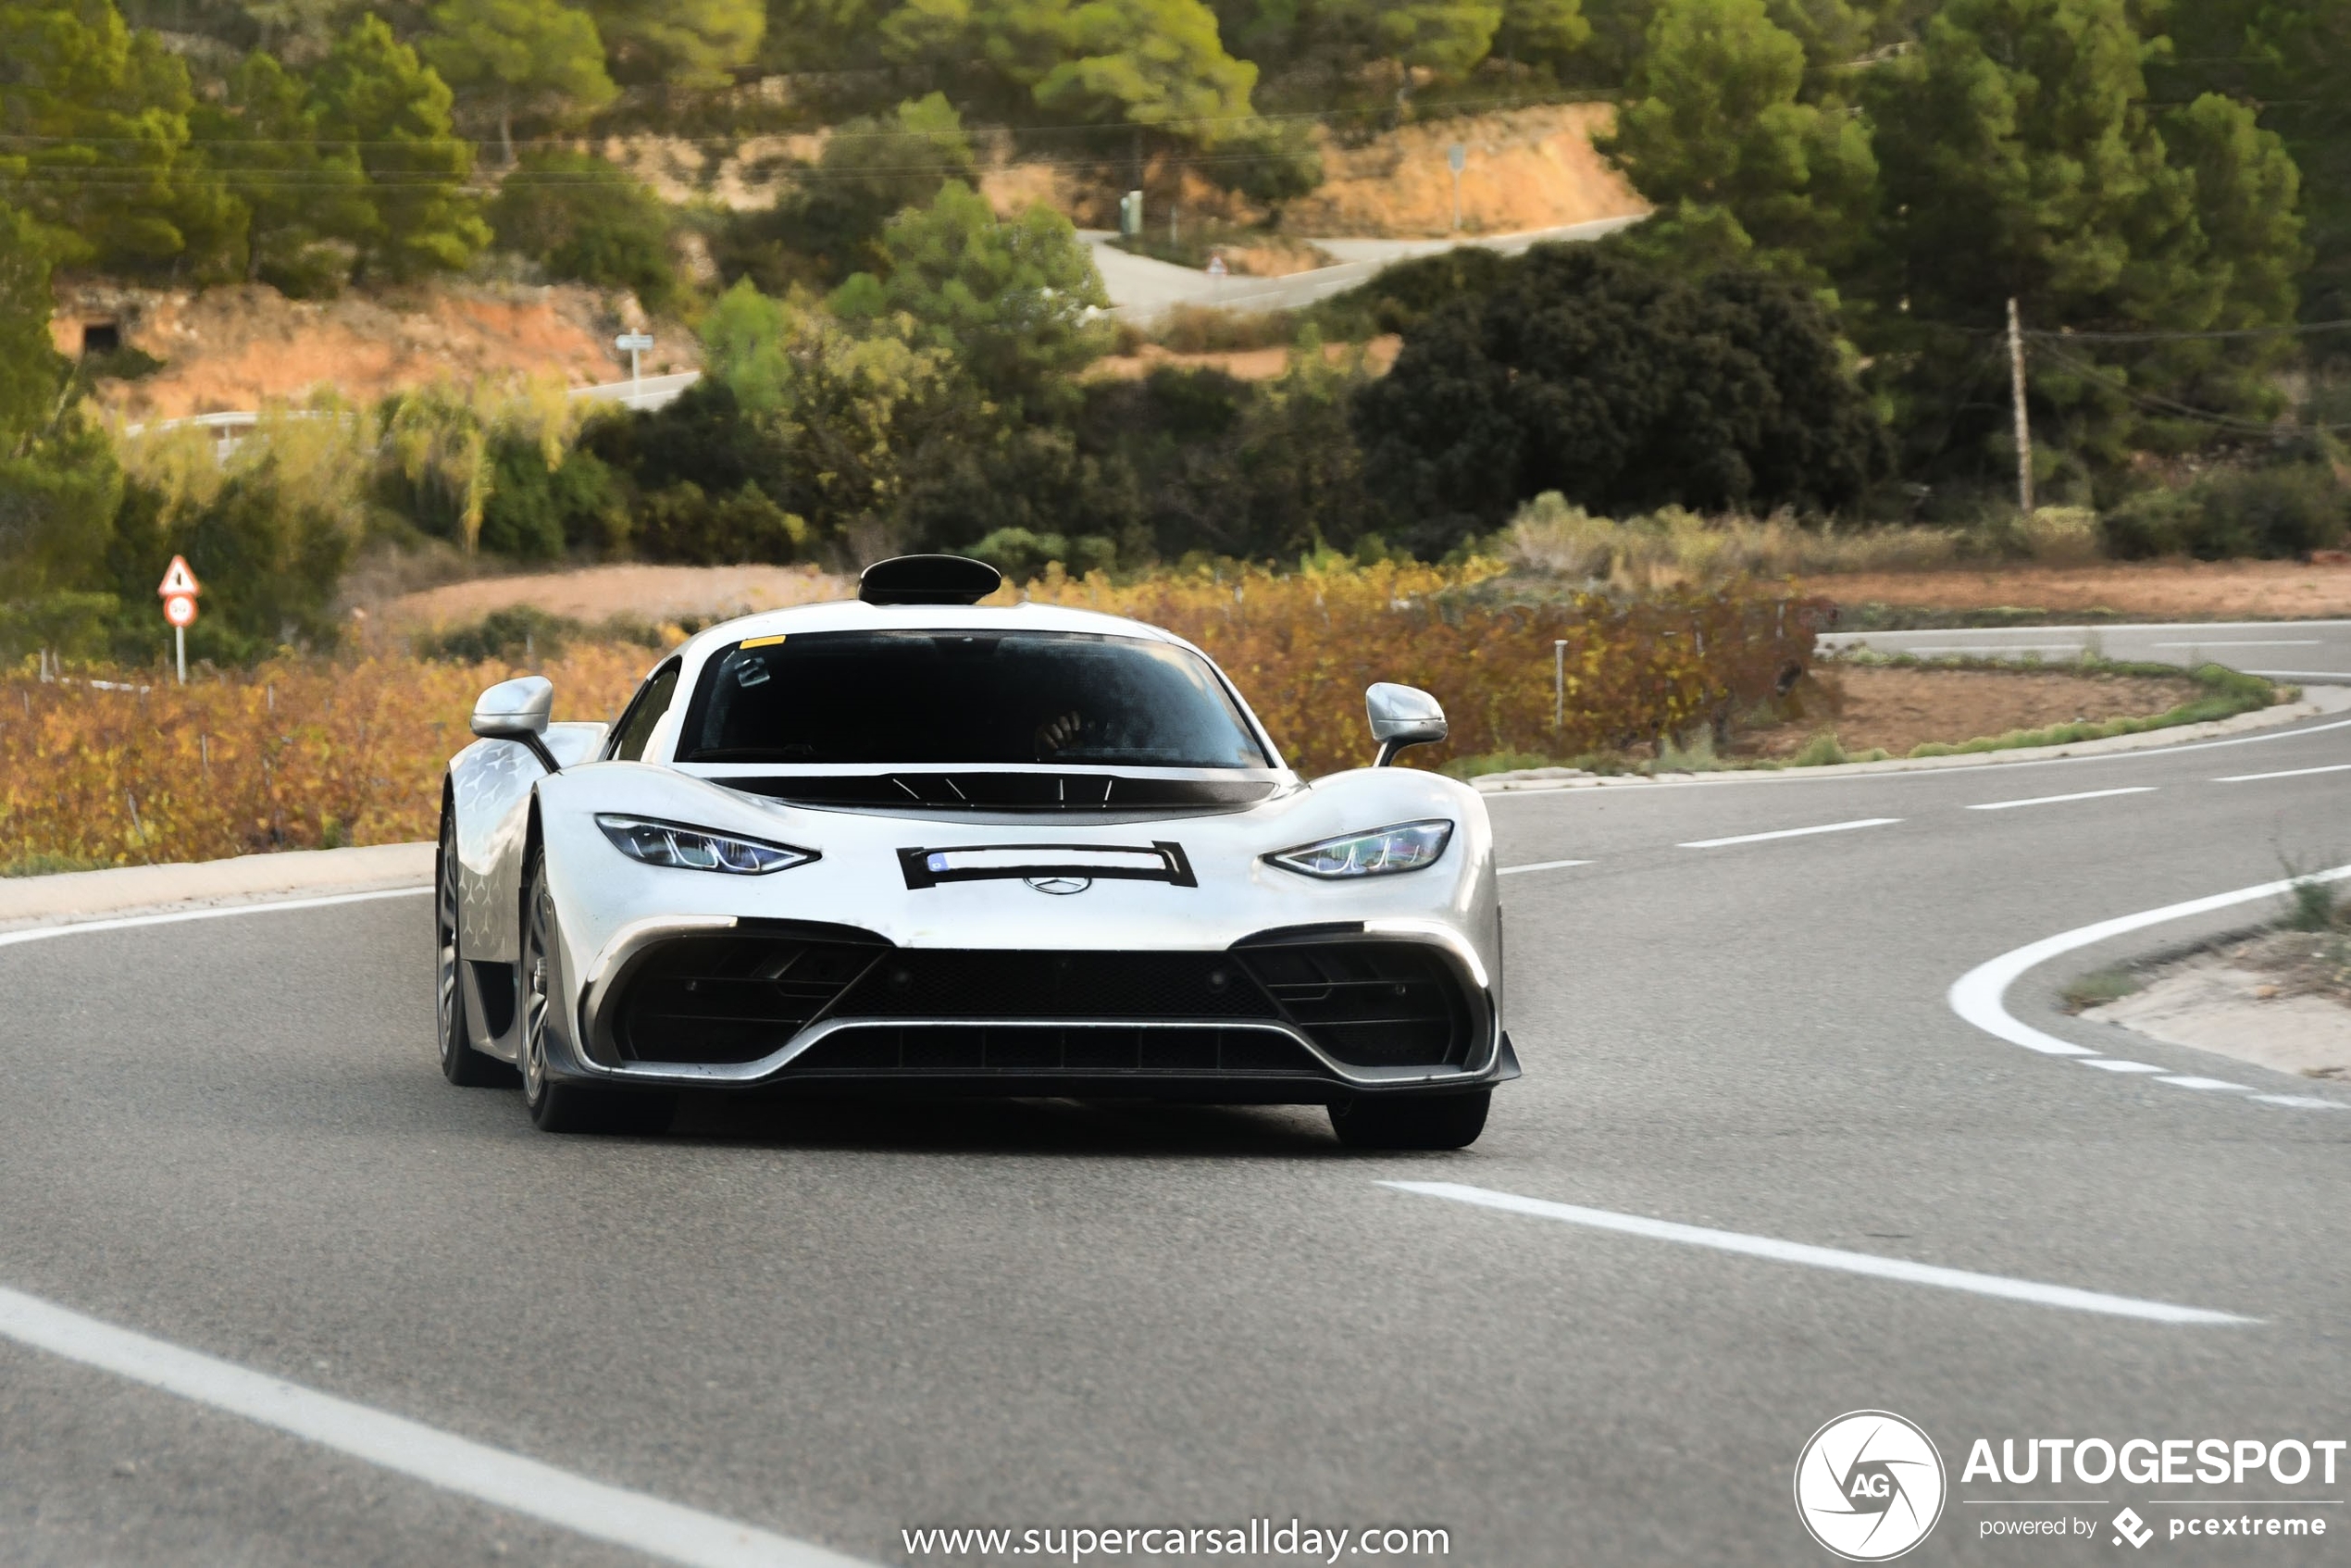 Is the Mercedes-AMG Project One finally ready?